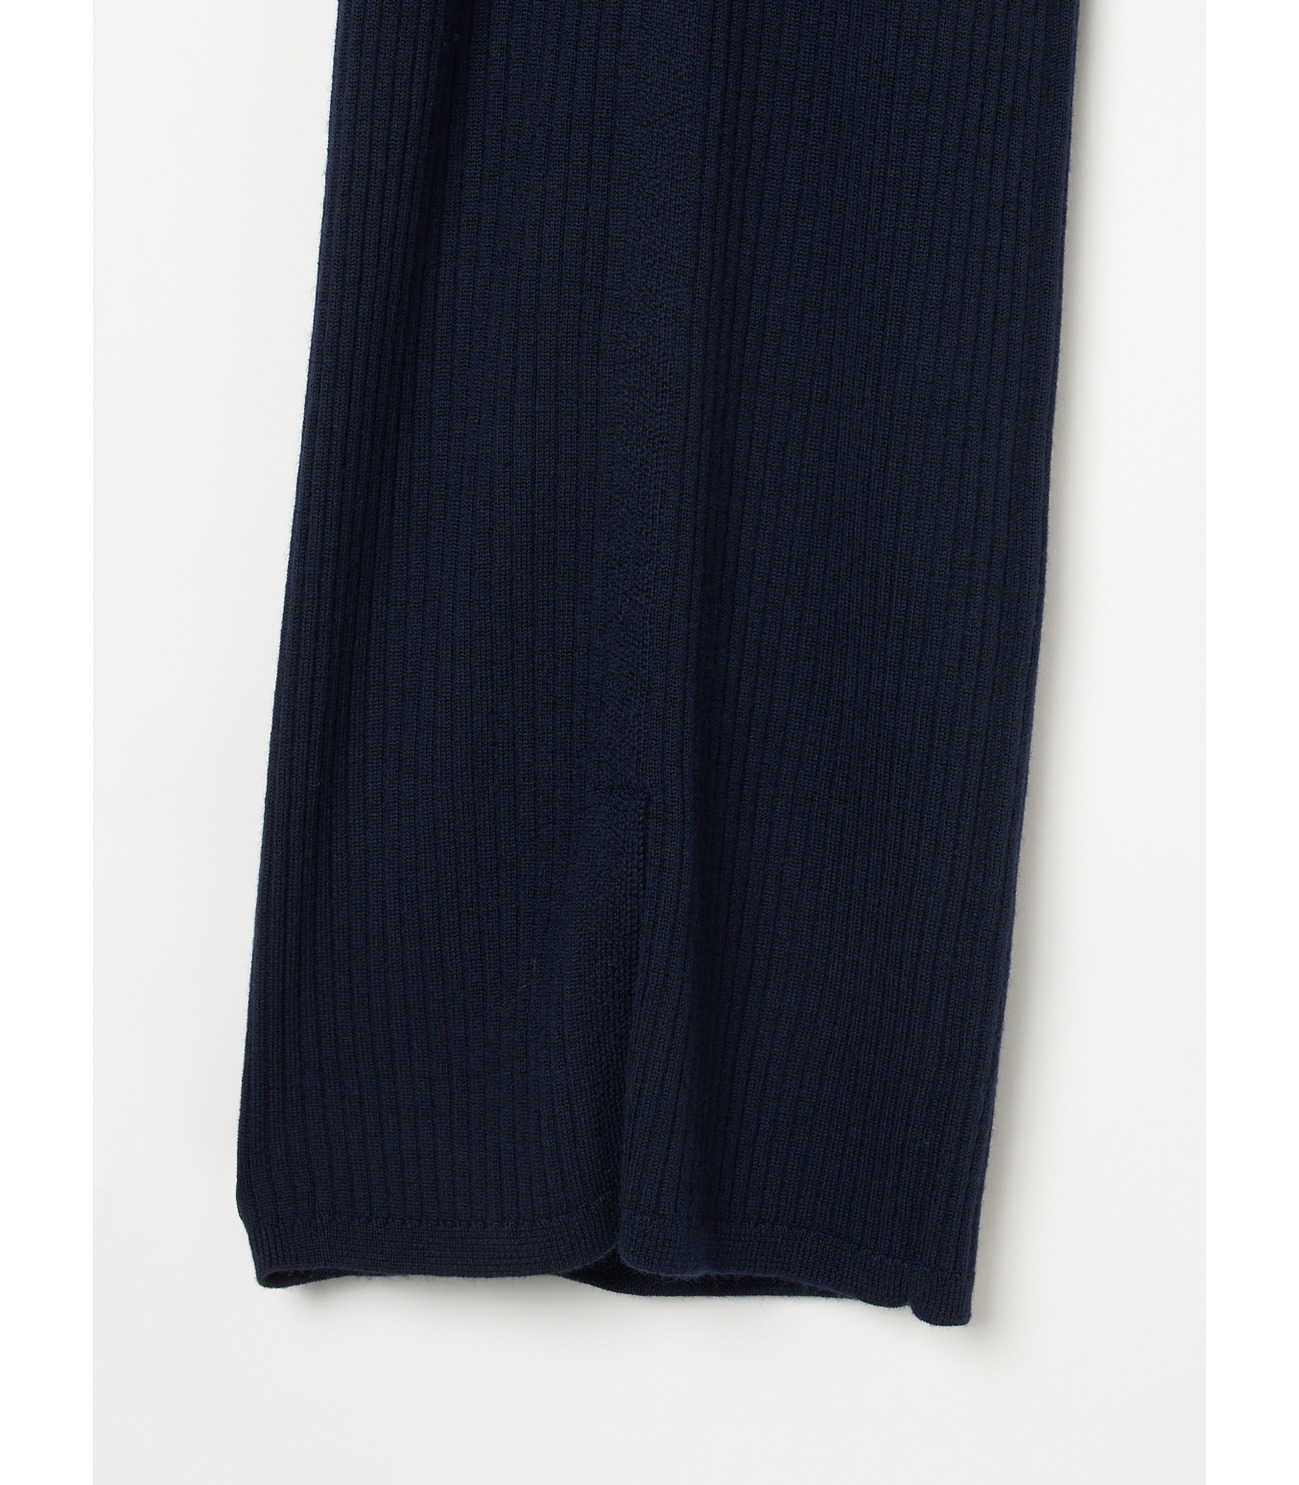 Wool outfit semi wide slit pant 詳細画像 navy 4